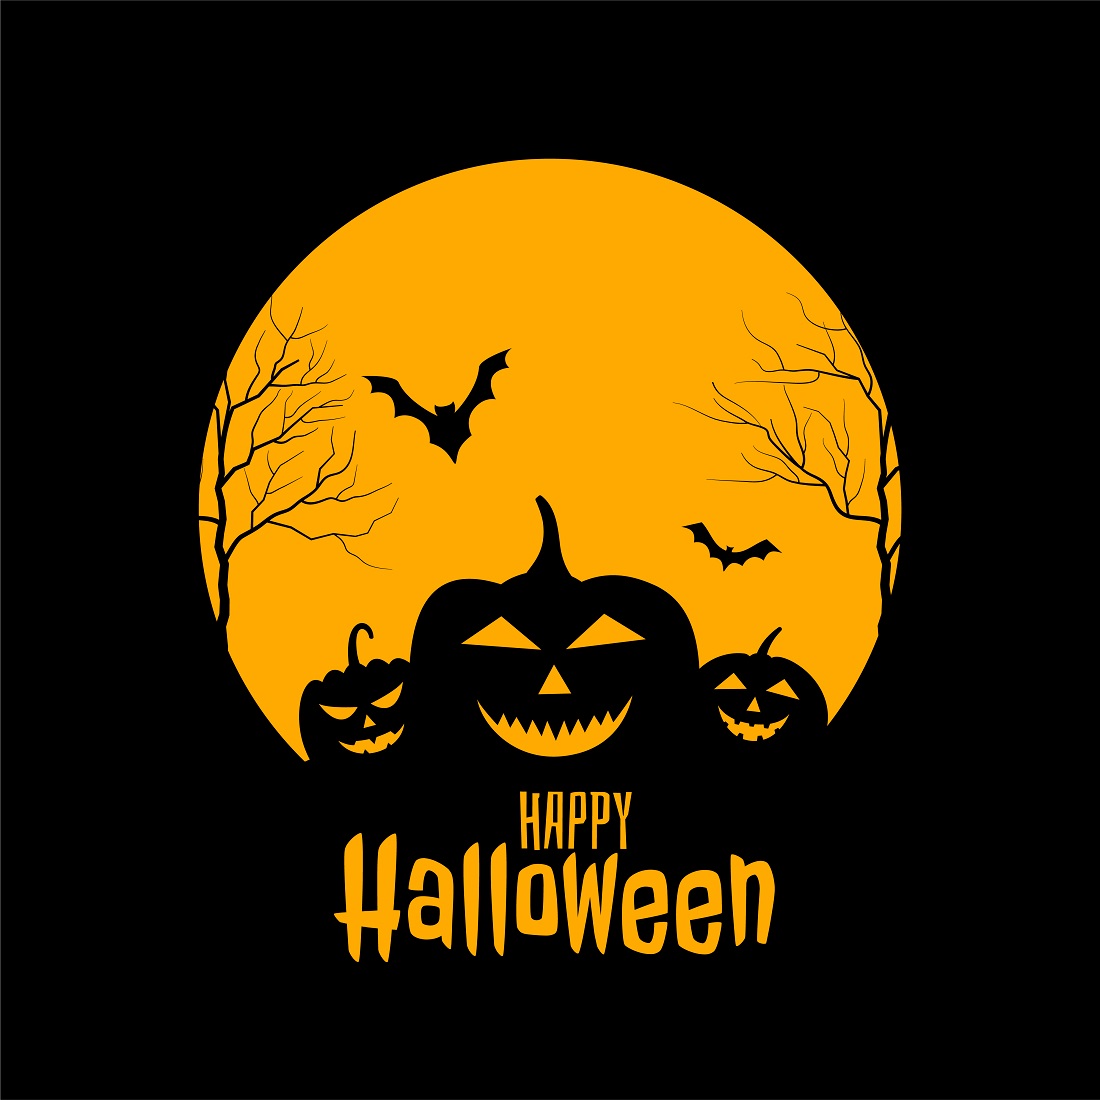 Happy Halloween scary black yellow design preview image.